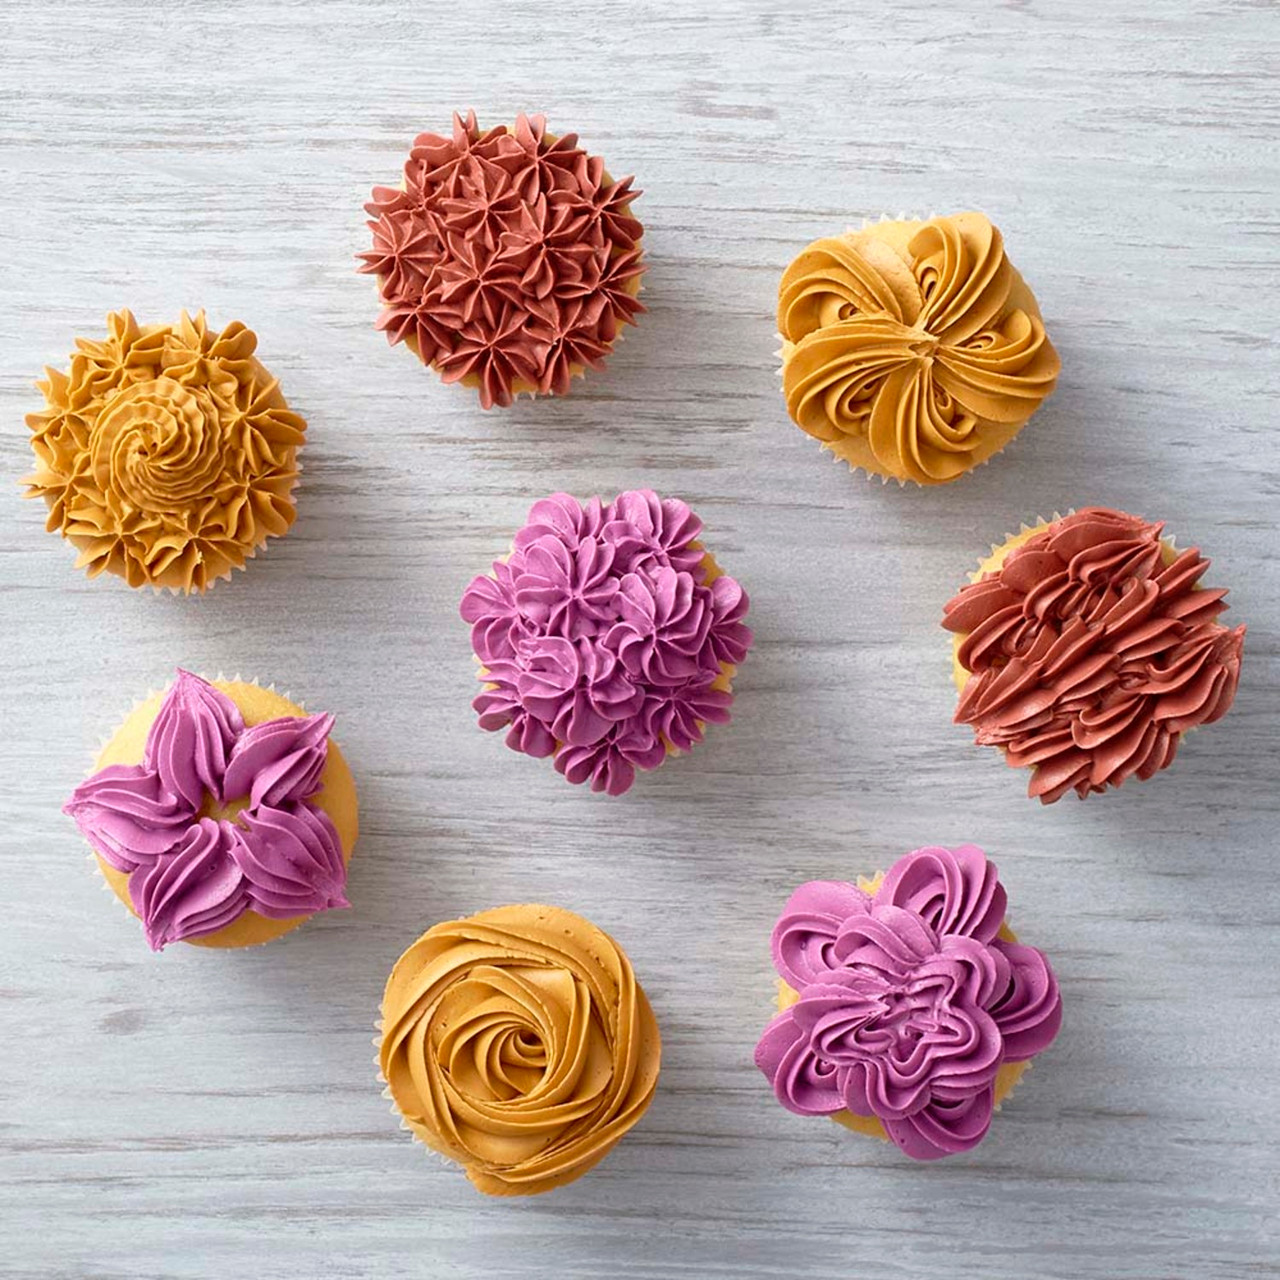 BUY BAKING AND CAKE DECORATIONS ONLINE. NOZZLE GIANT ROSE / PETAL / RU